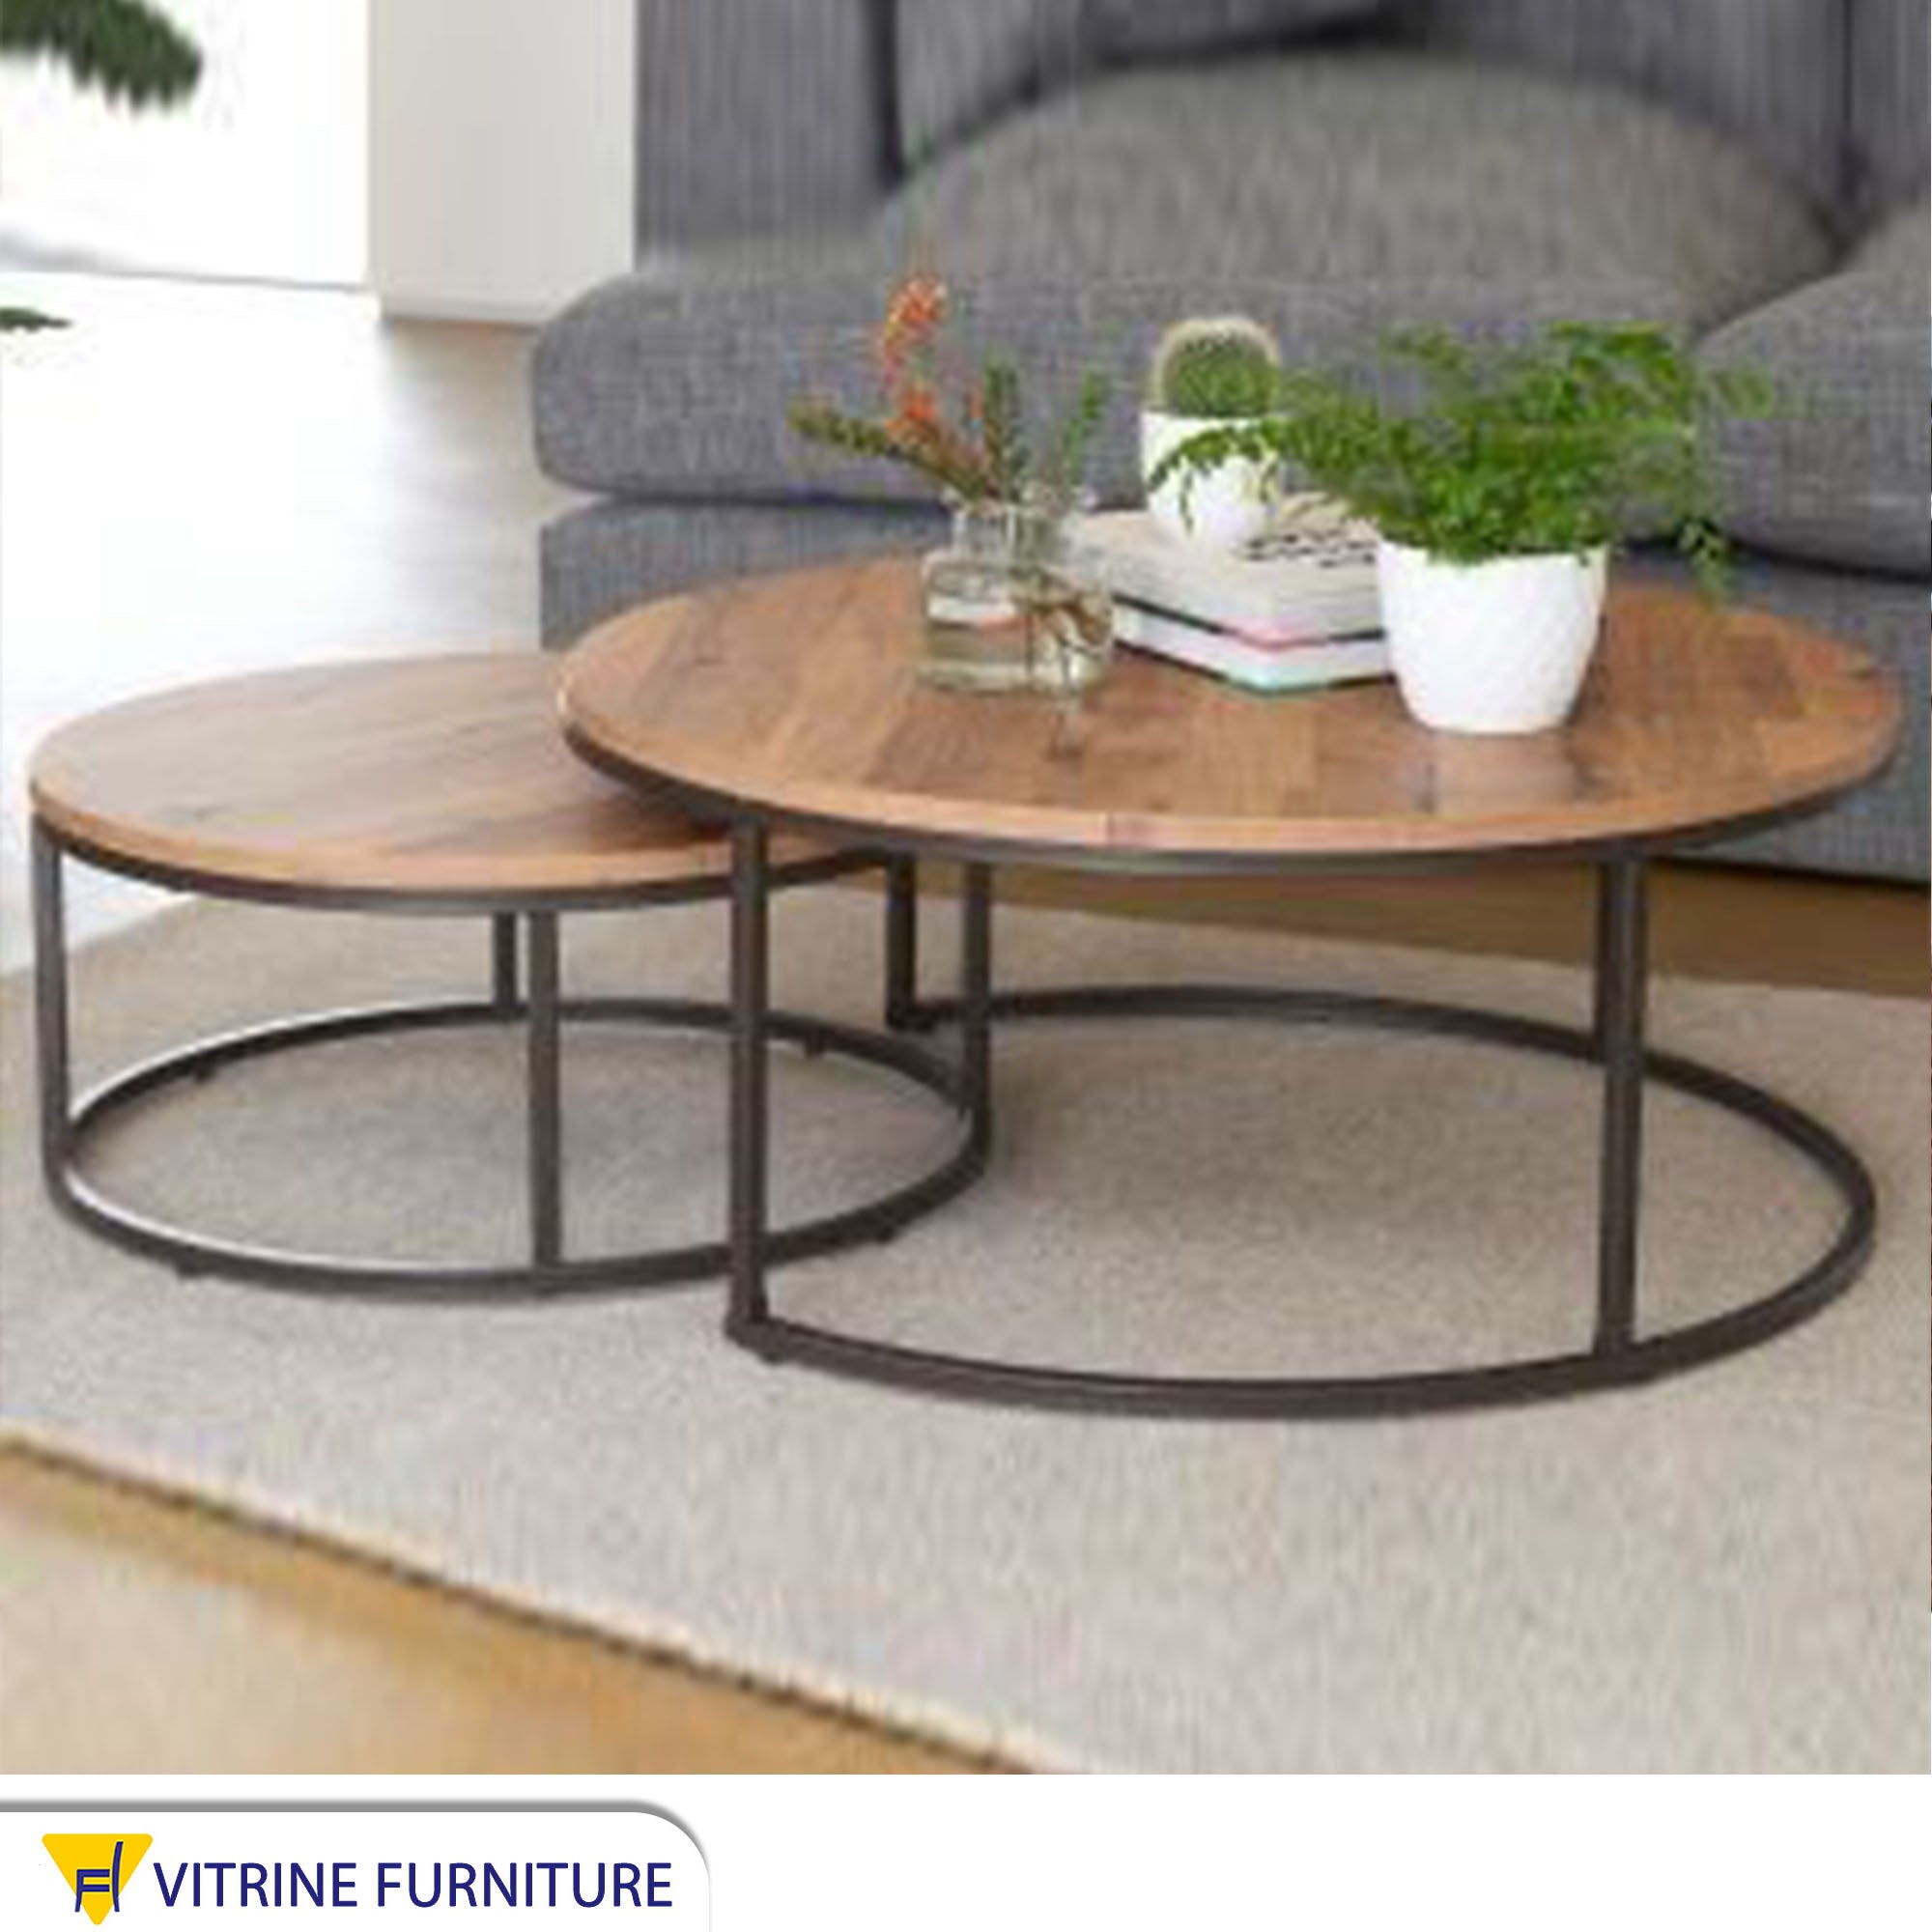 Two nested circular tables